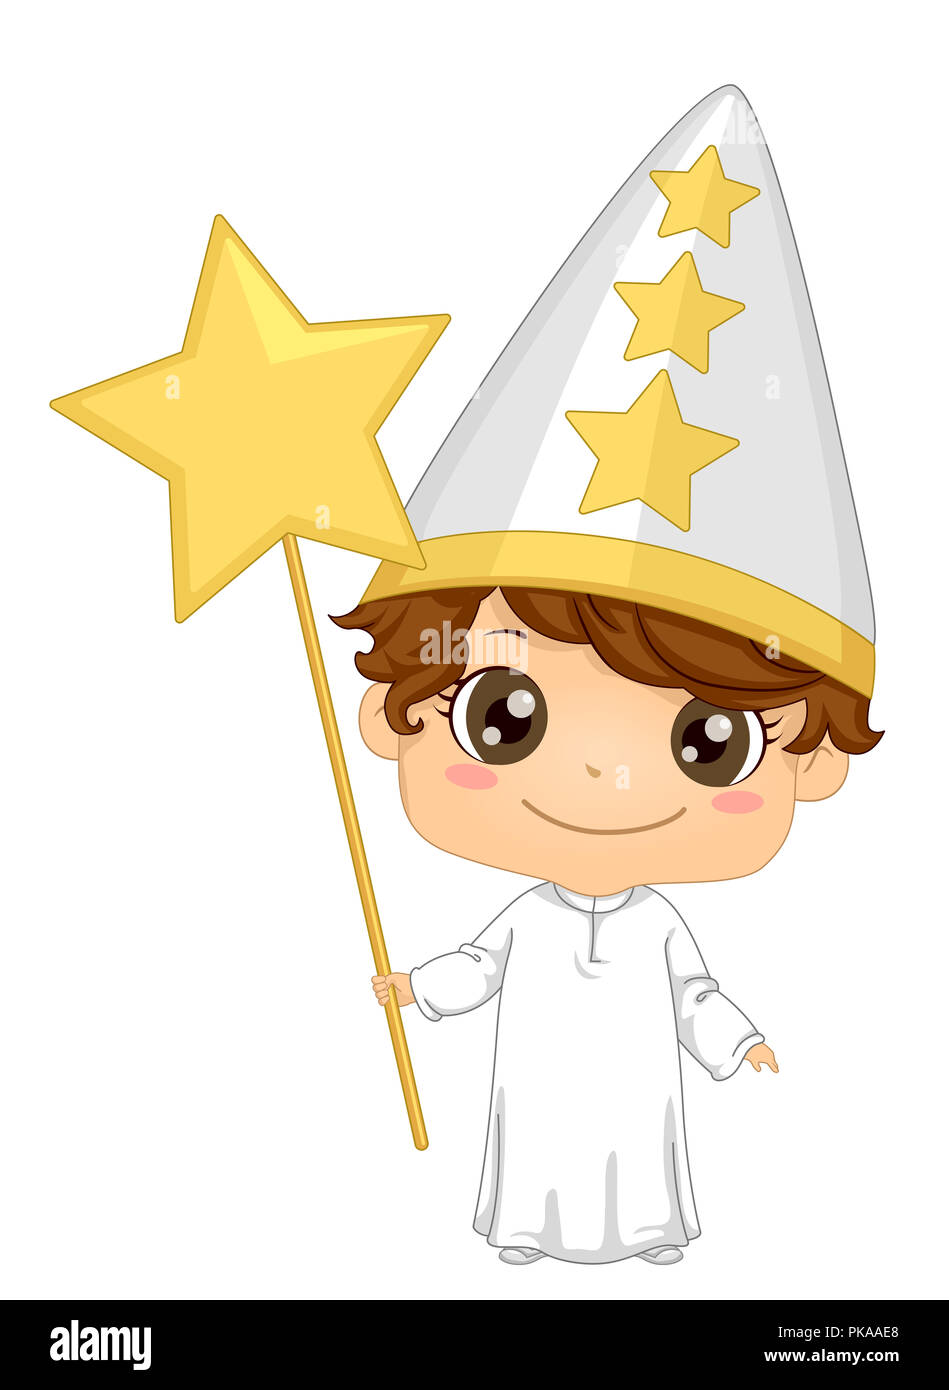 Illustration of a Kid Boy Wearing a Star Boy Costume for Saint Lucia Feast Stock Photo